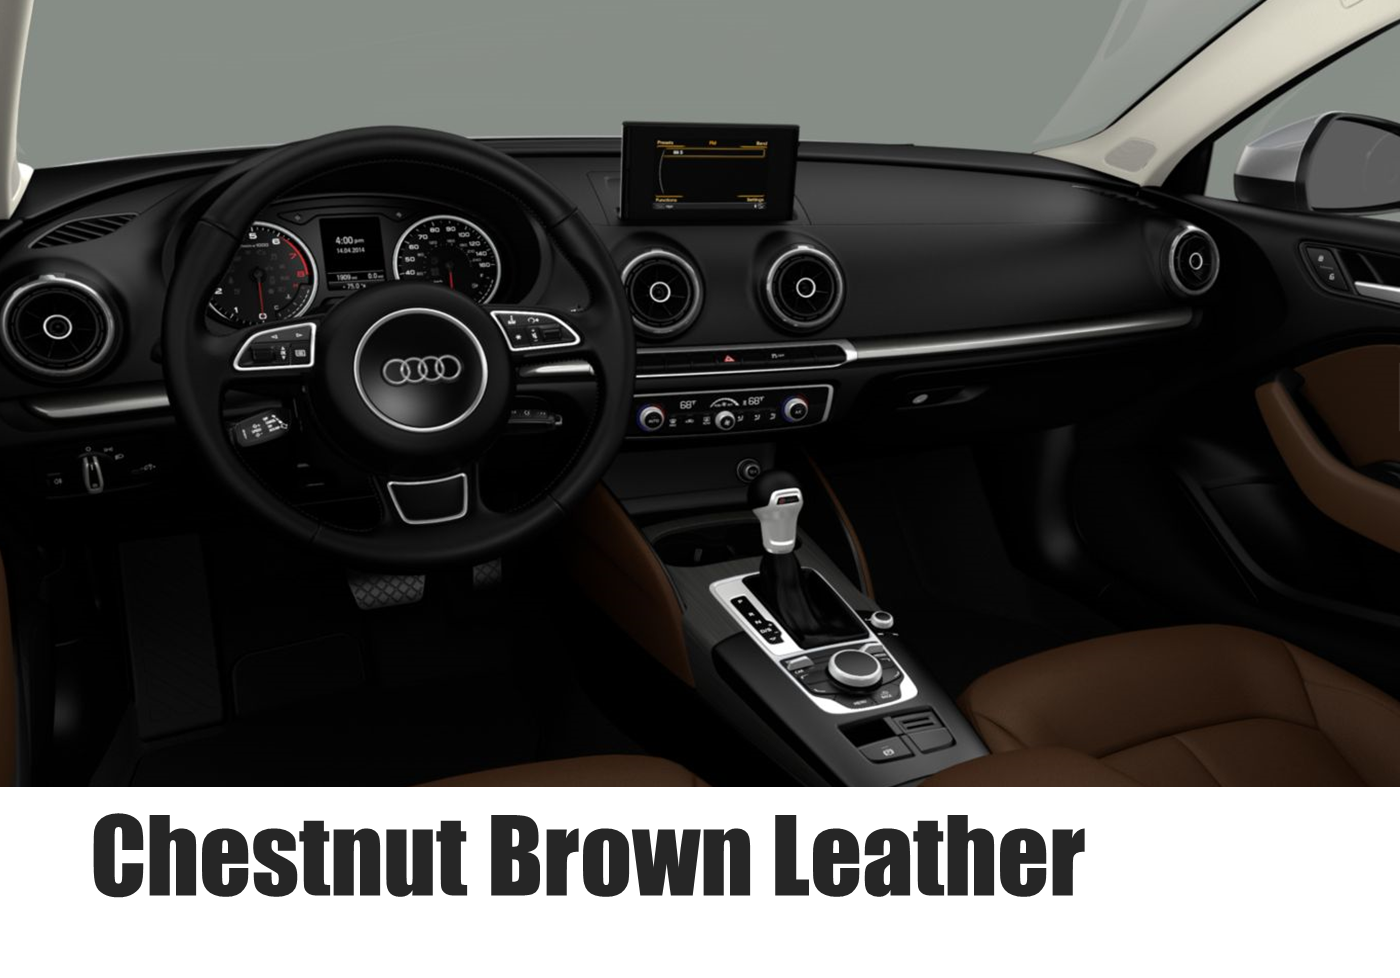 Chestnut Brown Leather Audi A3